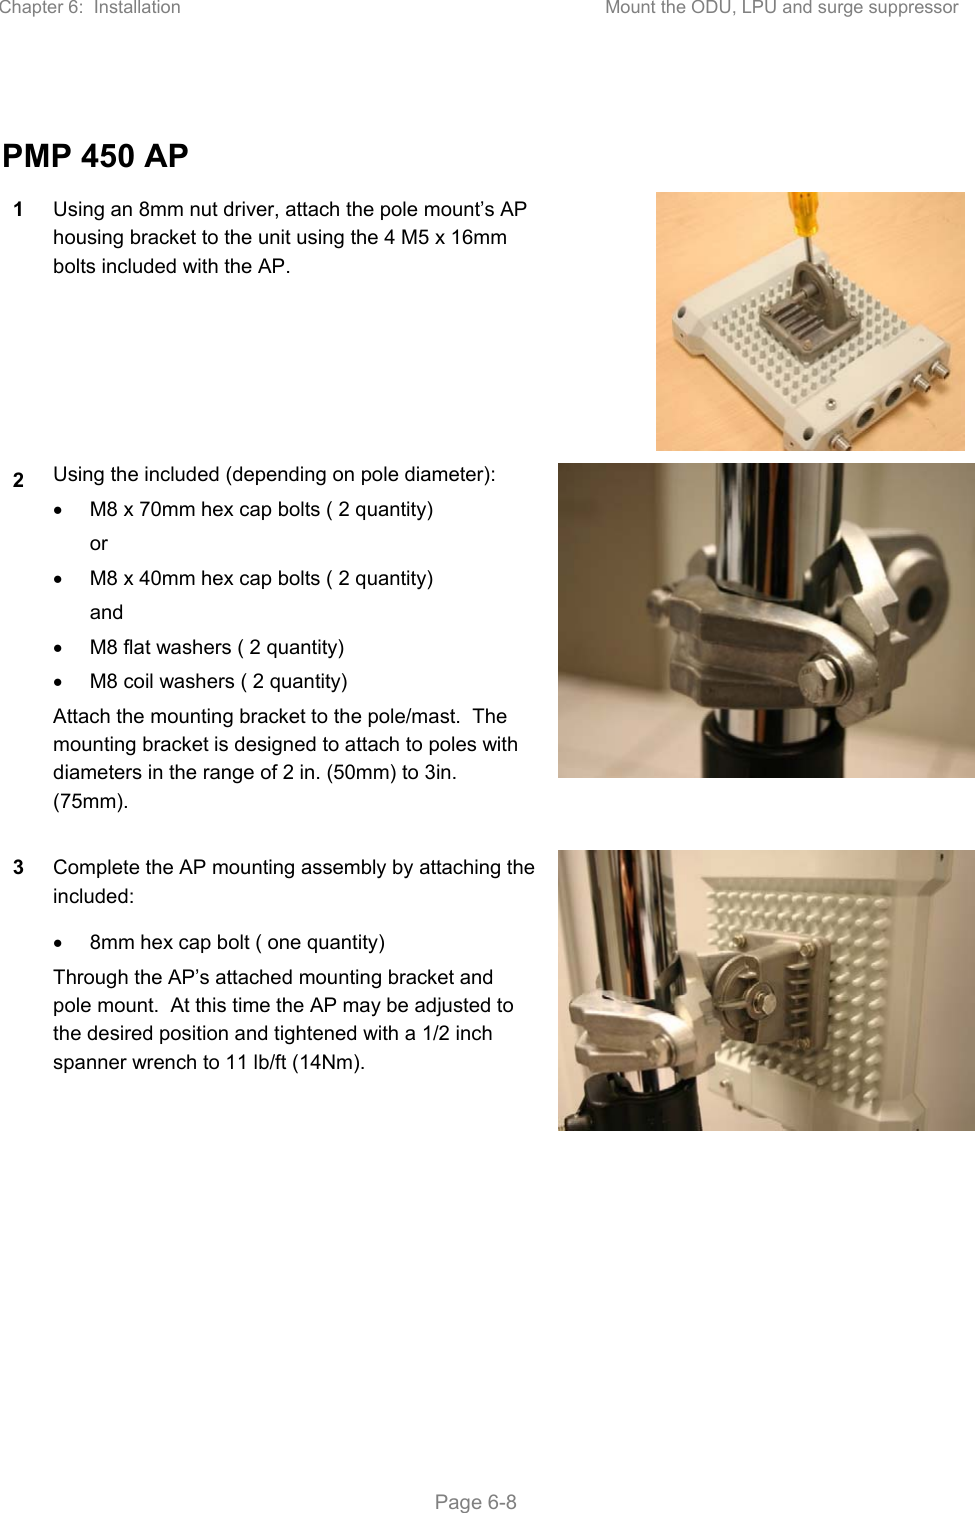 Chapter 6:  Installation  Mount the ODU, LPU and surge suppressor   Page 6-8  PMP 450 AP 1  Using an 8mm nut driver, attach the pole mount’s AP housing bracket to the unit using the 4 M5 x 16mm bolts included with the AP. 2  Using the included (depending on pole diameter):   M8 x 70mm hex cap bolts ( 2 quantity) or   M8 x 40mm hex cap bolts ( 2 quantity) and   M8 flat washers ( 2 quantity)   M8 coil washers ( 2 quantity) Attach the mounting bracket to the pole/mast.  The mounting bracket is designed to attach to poles with diameters in the range of 2 in. (50mm) to 3in. (75mm). 3  Complete the AP mounting assembly by attaching the included:   8mm hex cap bolt ( one quantity) Through the AP’s attached mounting bracket and pole mount.  At this time the AP may be adjusted to the desired position and tightened with a 1/2 inch spanner wrench to 11 lb/ft (14Nm).   